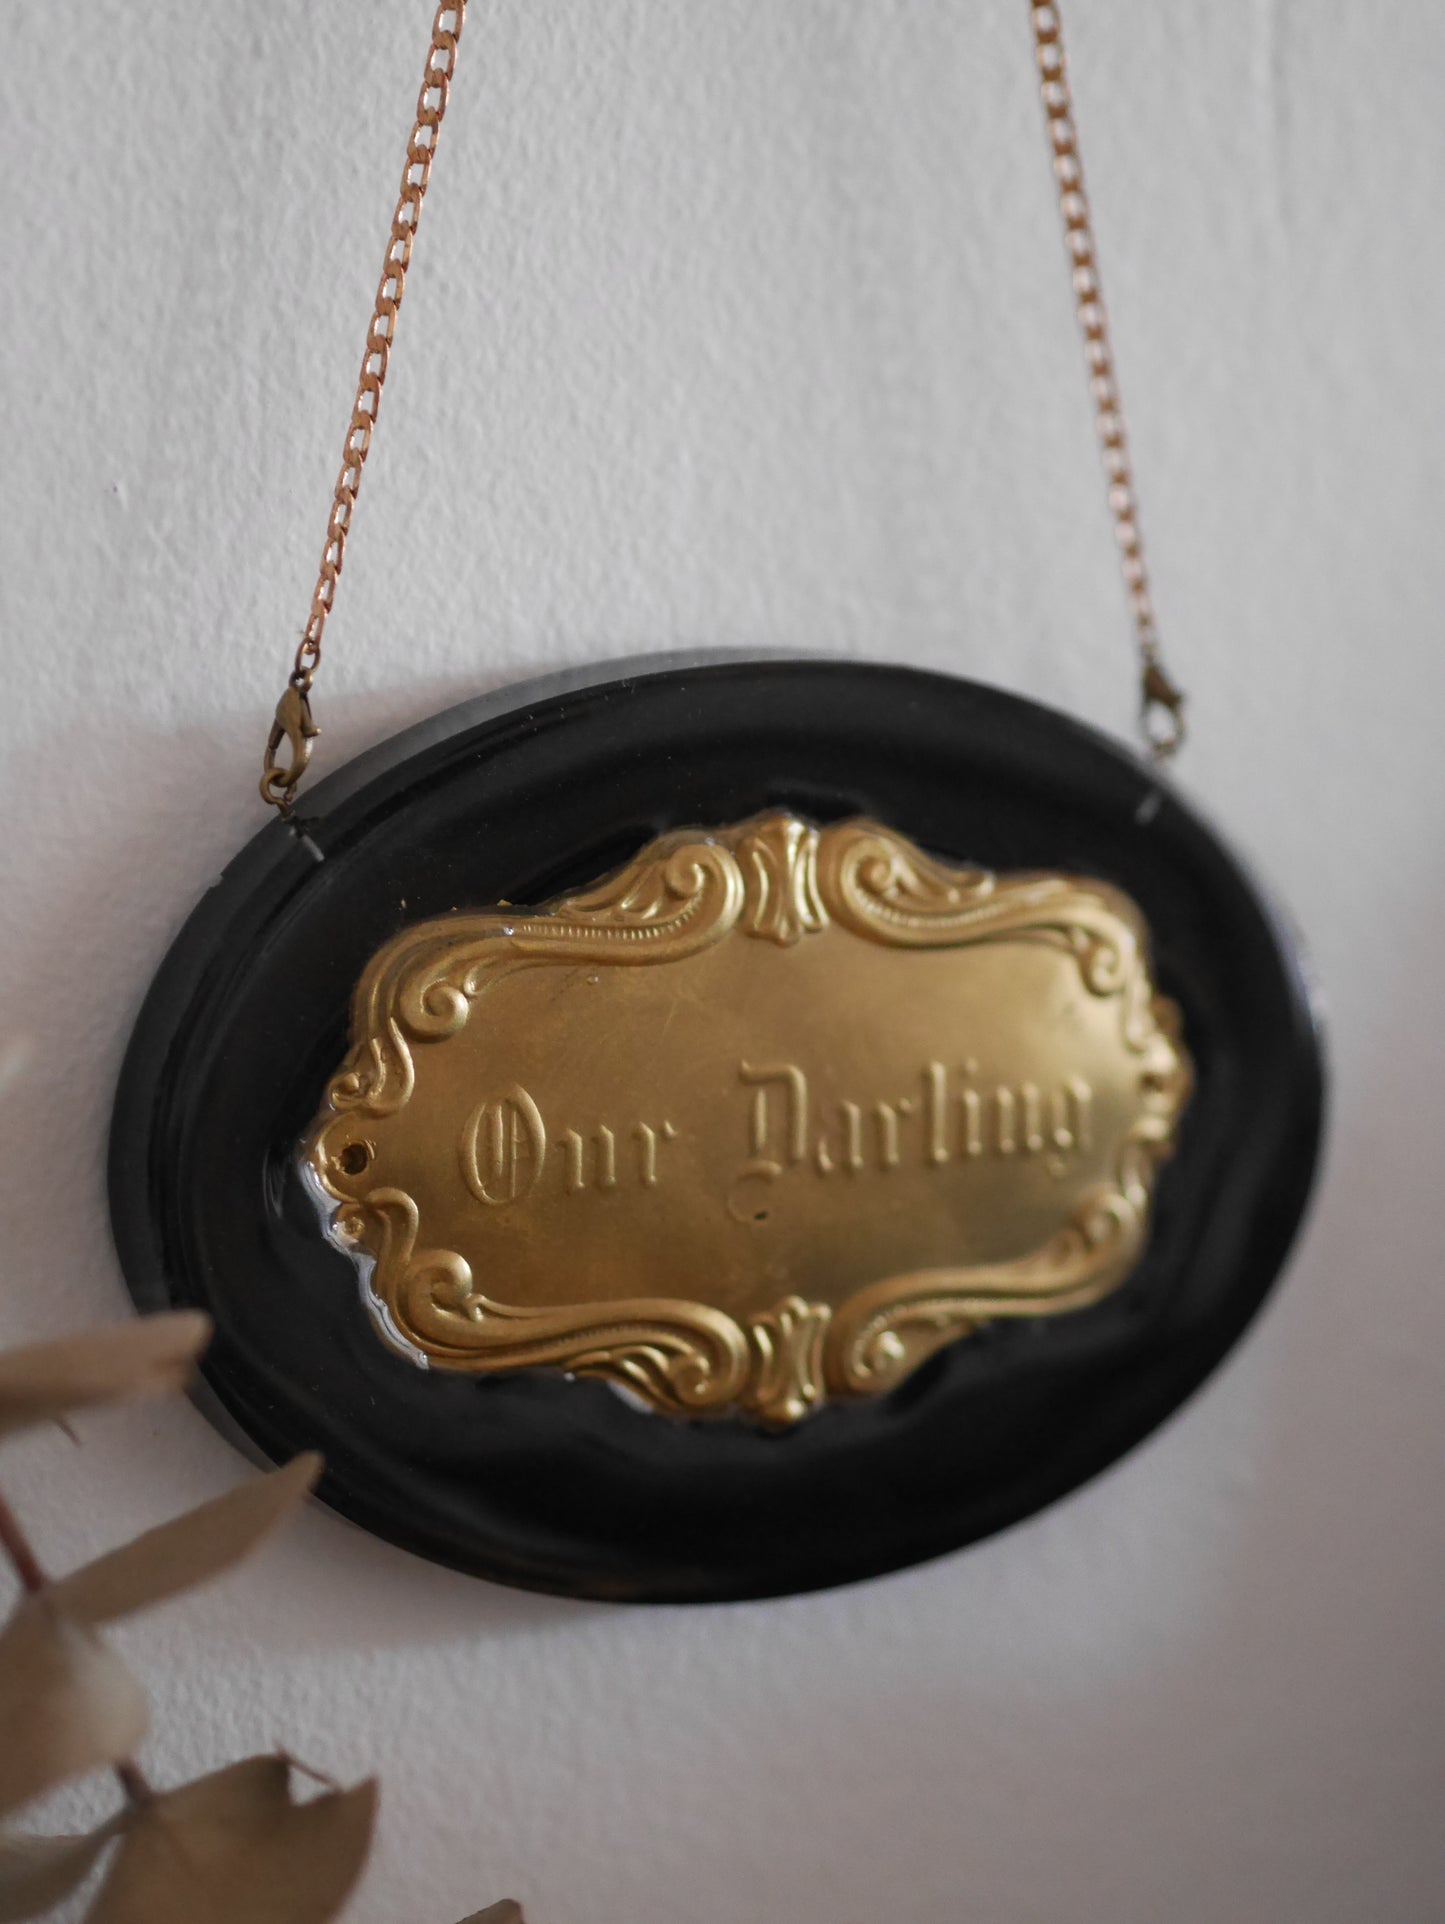 Our Darling Victorian Mourning Casket Plaque - Gold